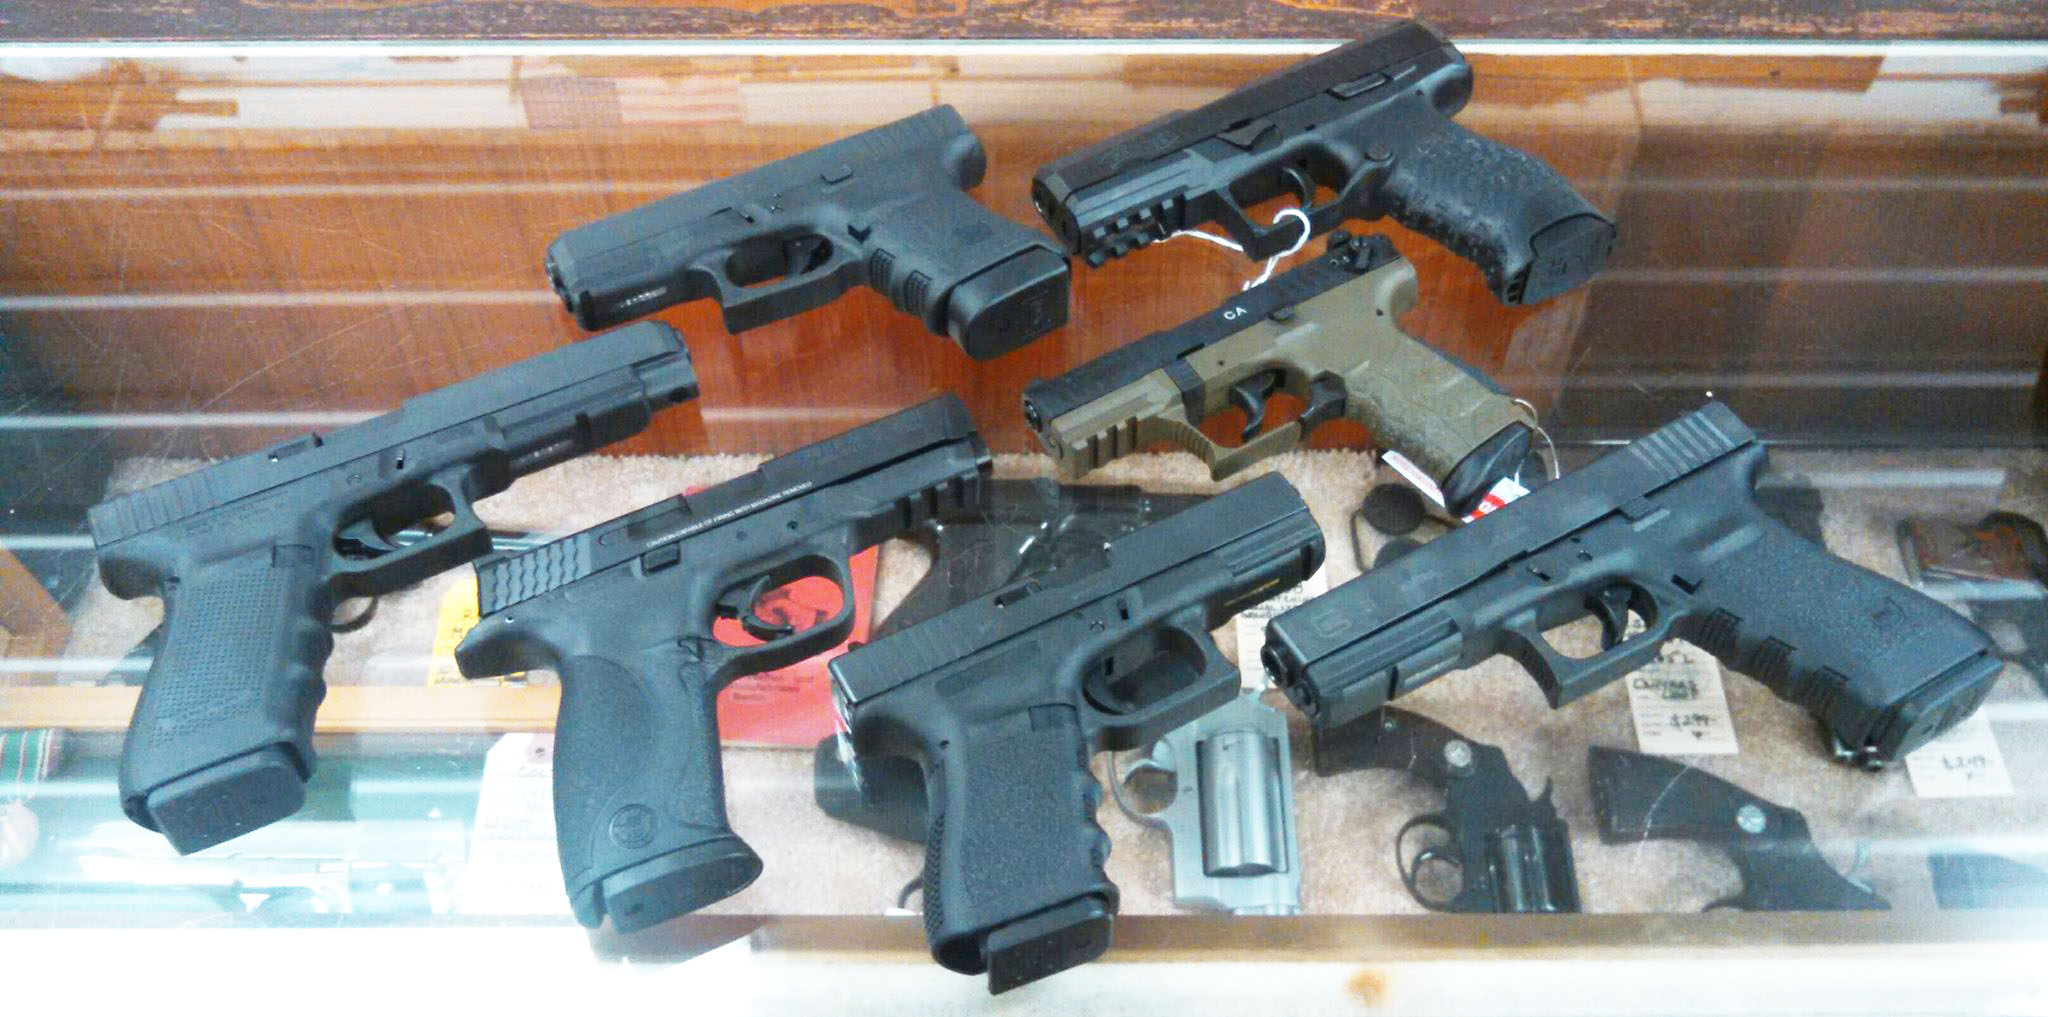 IN STOCK- NEW HANDGUNS- GLOCK 30S .45, GLOCK 41gen4 .45, WALTHER PPX 9mm, SMITH & WESSON M&P9 9mm, WALTHER P22 .22lr, GLOCK 23 .40 & GLOCK 21 .45. Stop by and take a look!